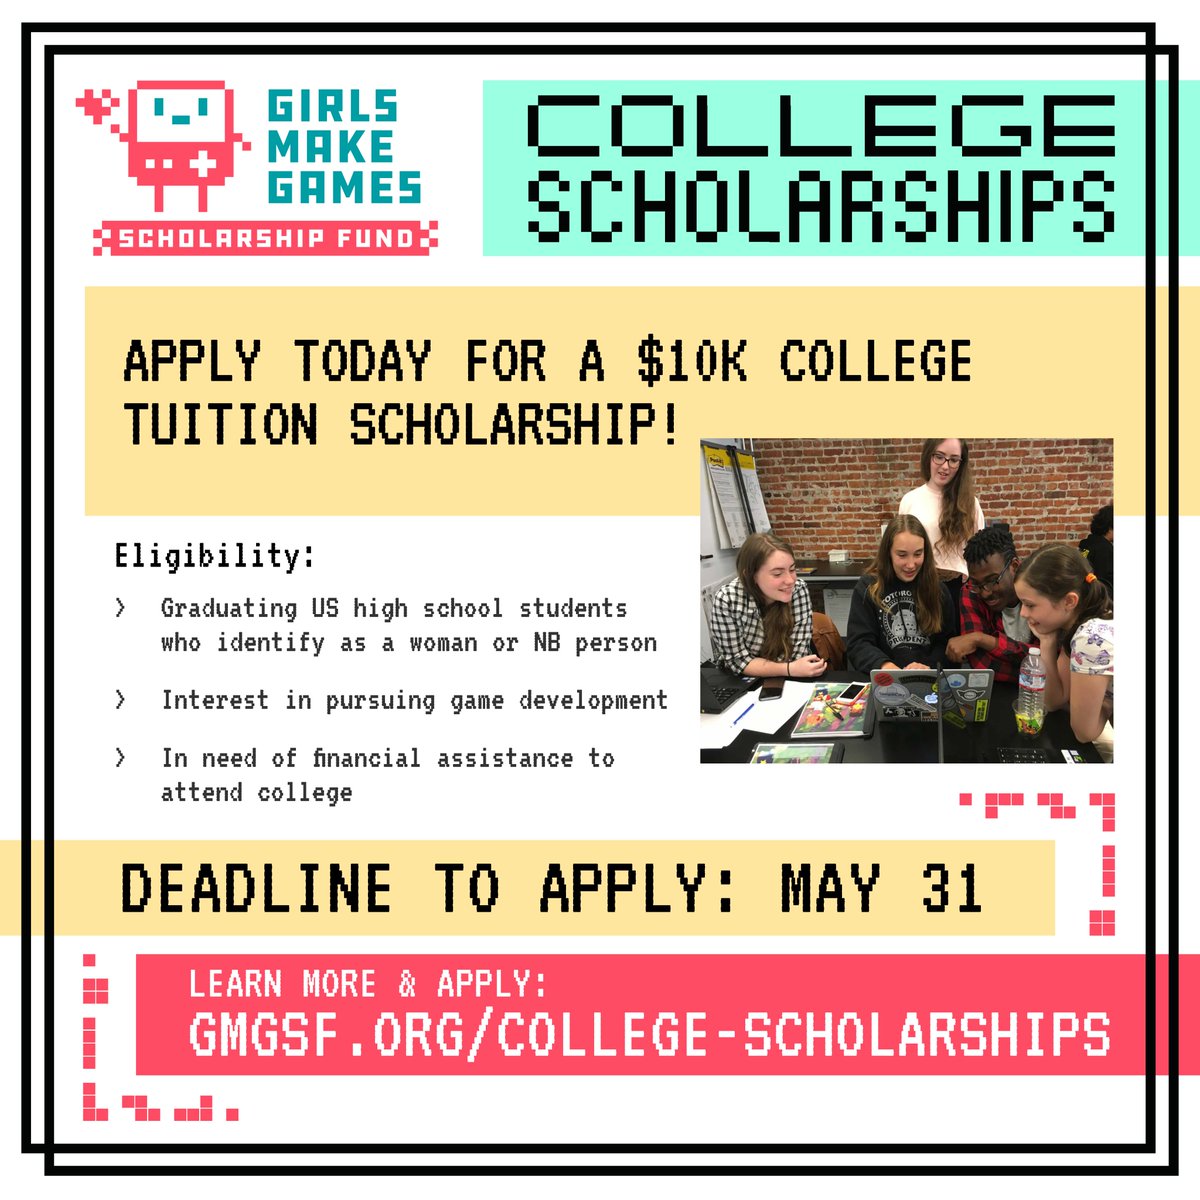 #ScholarshipAlert! Applications for the 2024 GMGSF College Scholarship are now open! 💸$10K tuition grant 👩‍🎓industry mentorship 🕹️internship & job placement opps Deadline 5/31 Open to female+nb high school seniors in US! Learn more & apply: bit.ly/gmgsf-college